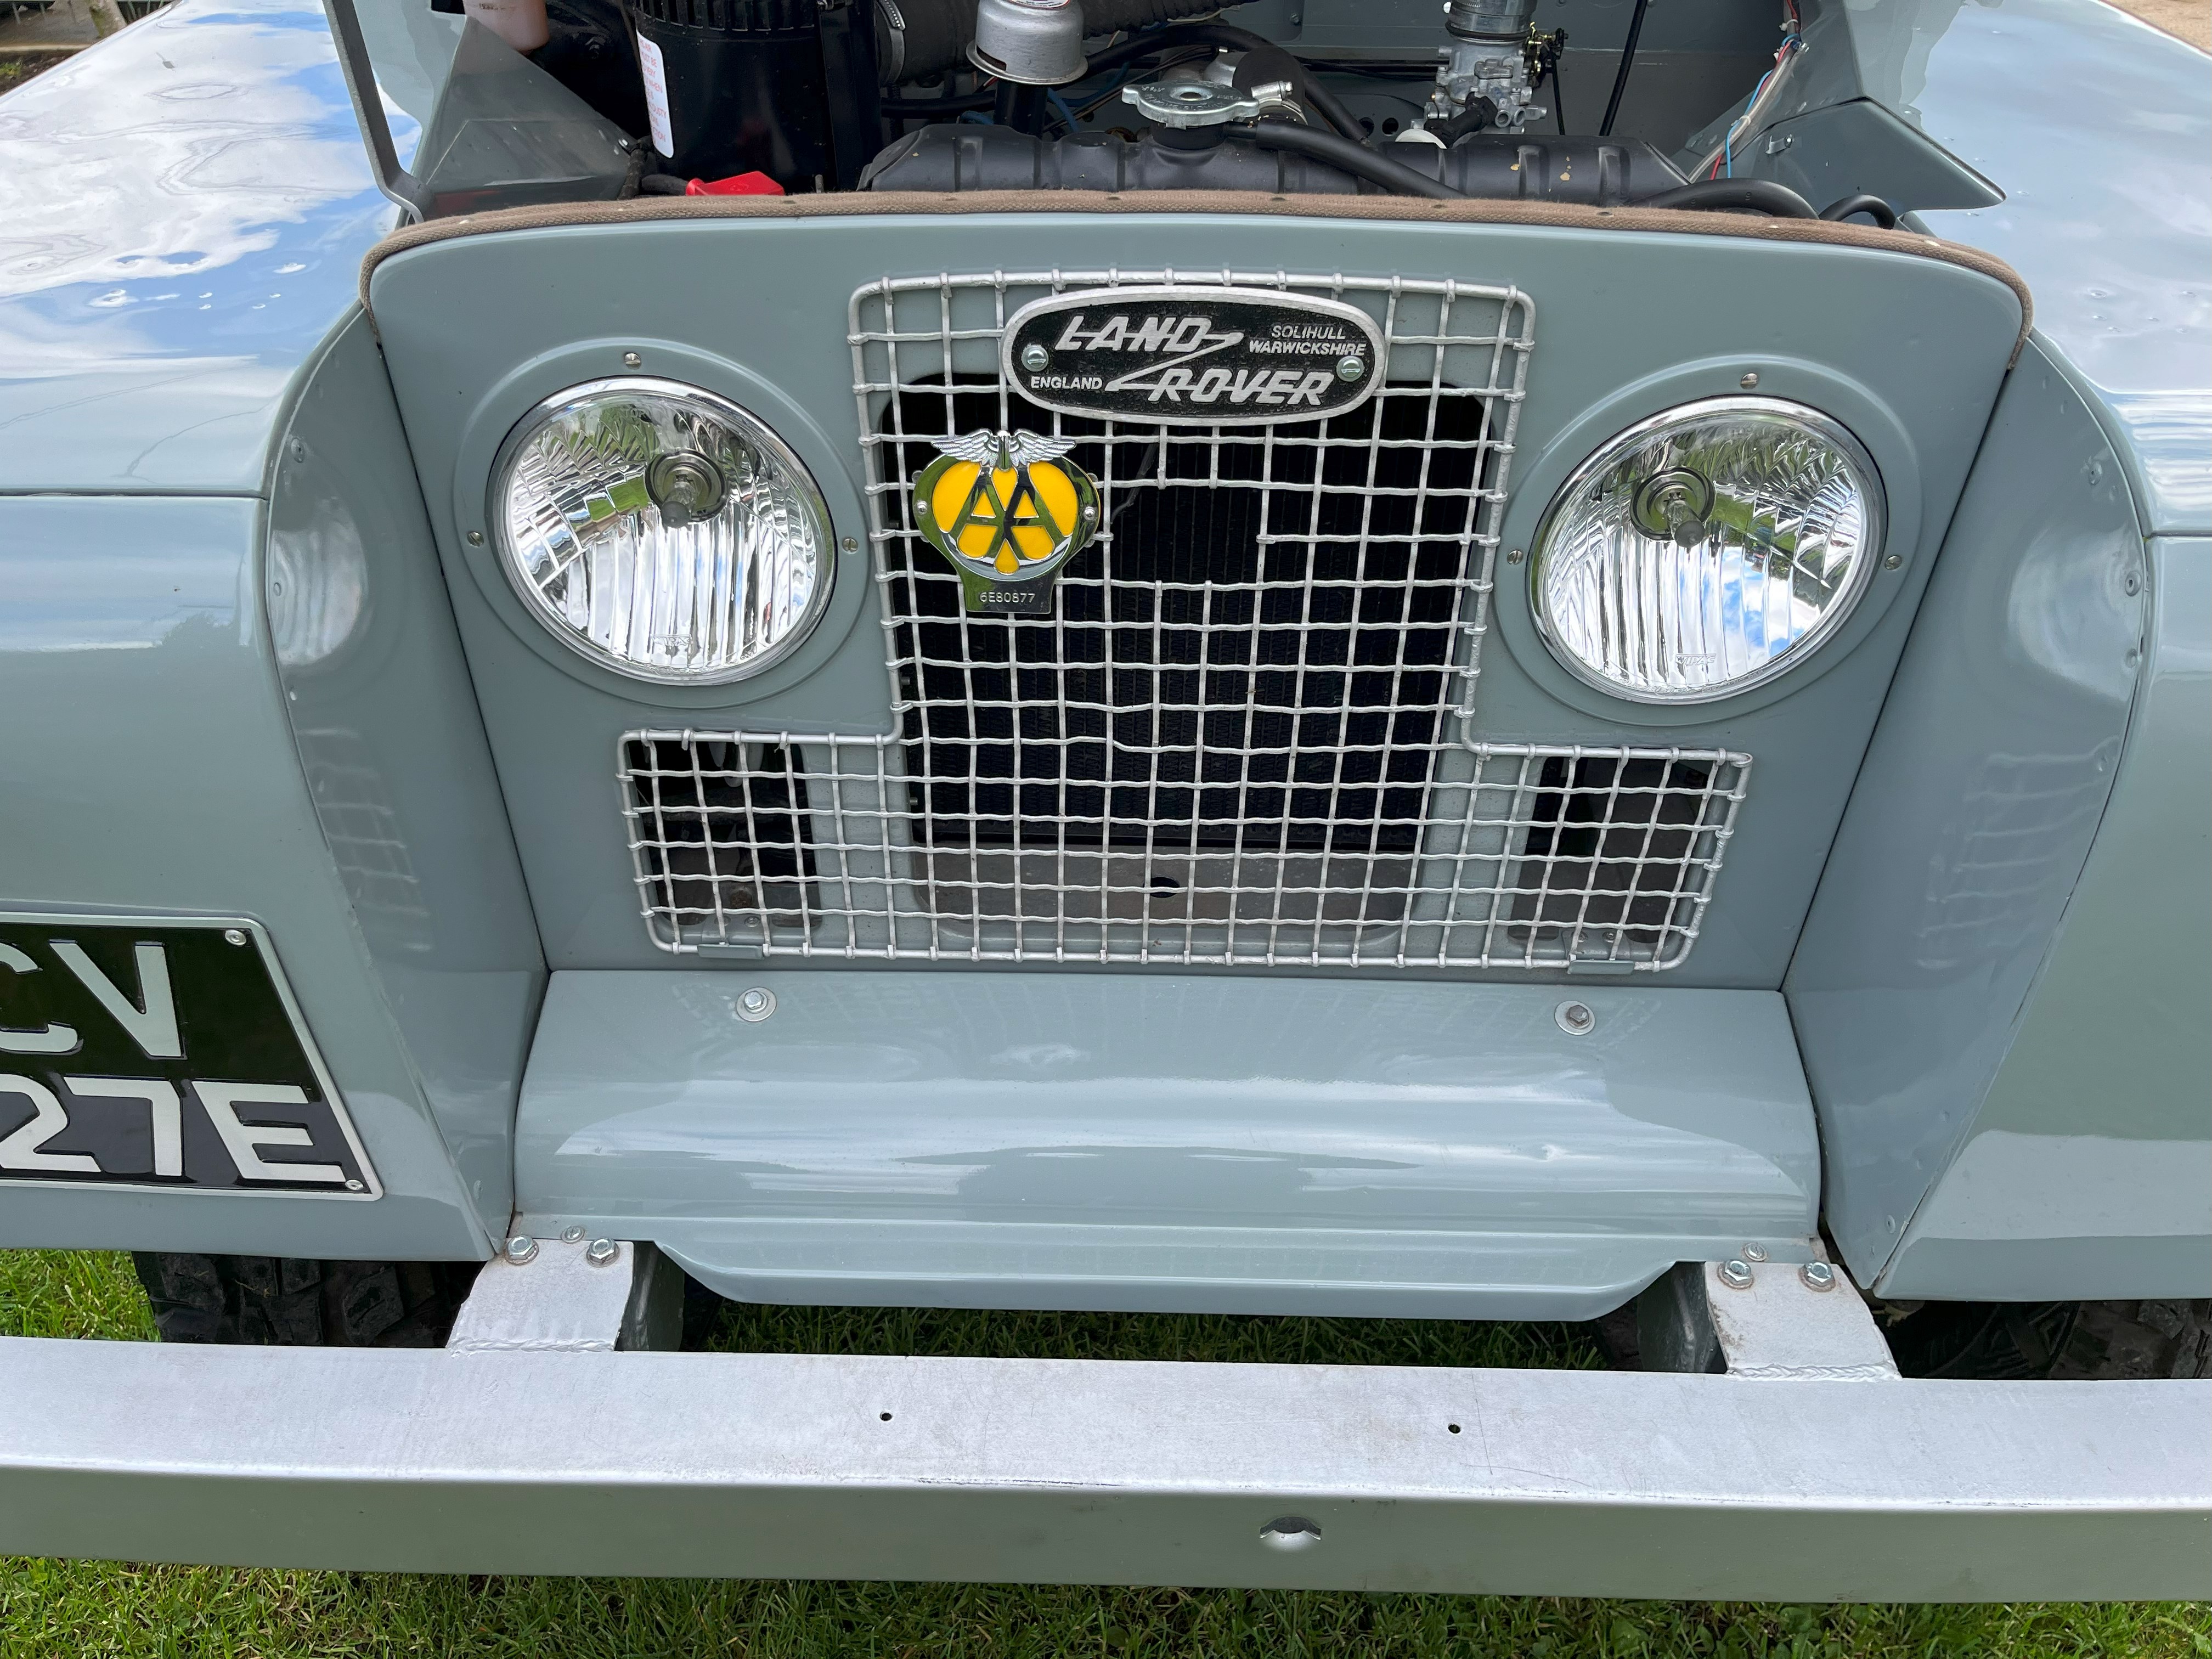 1967 Land Rover 88 Series IIA, this historic vehicle has been professionally restored from the - Image 13 of 20